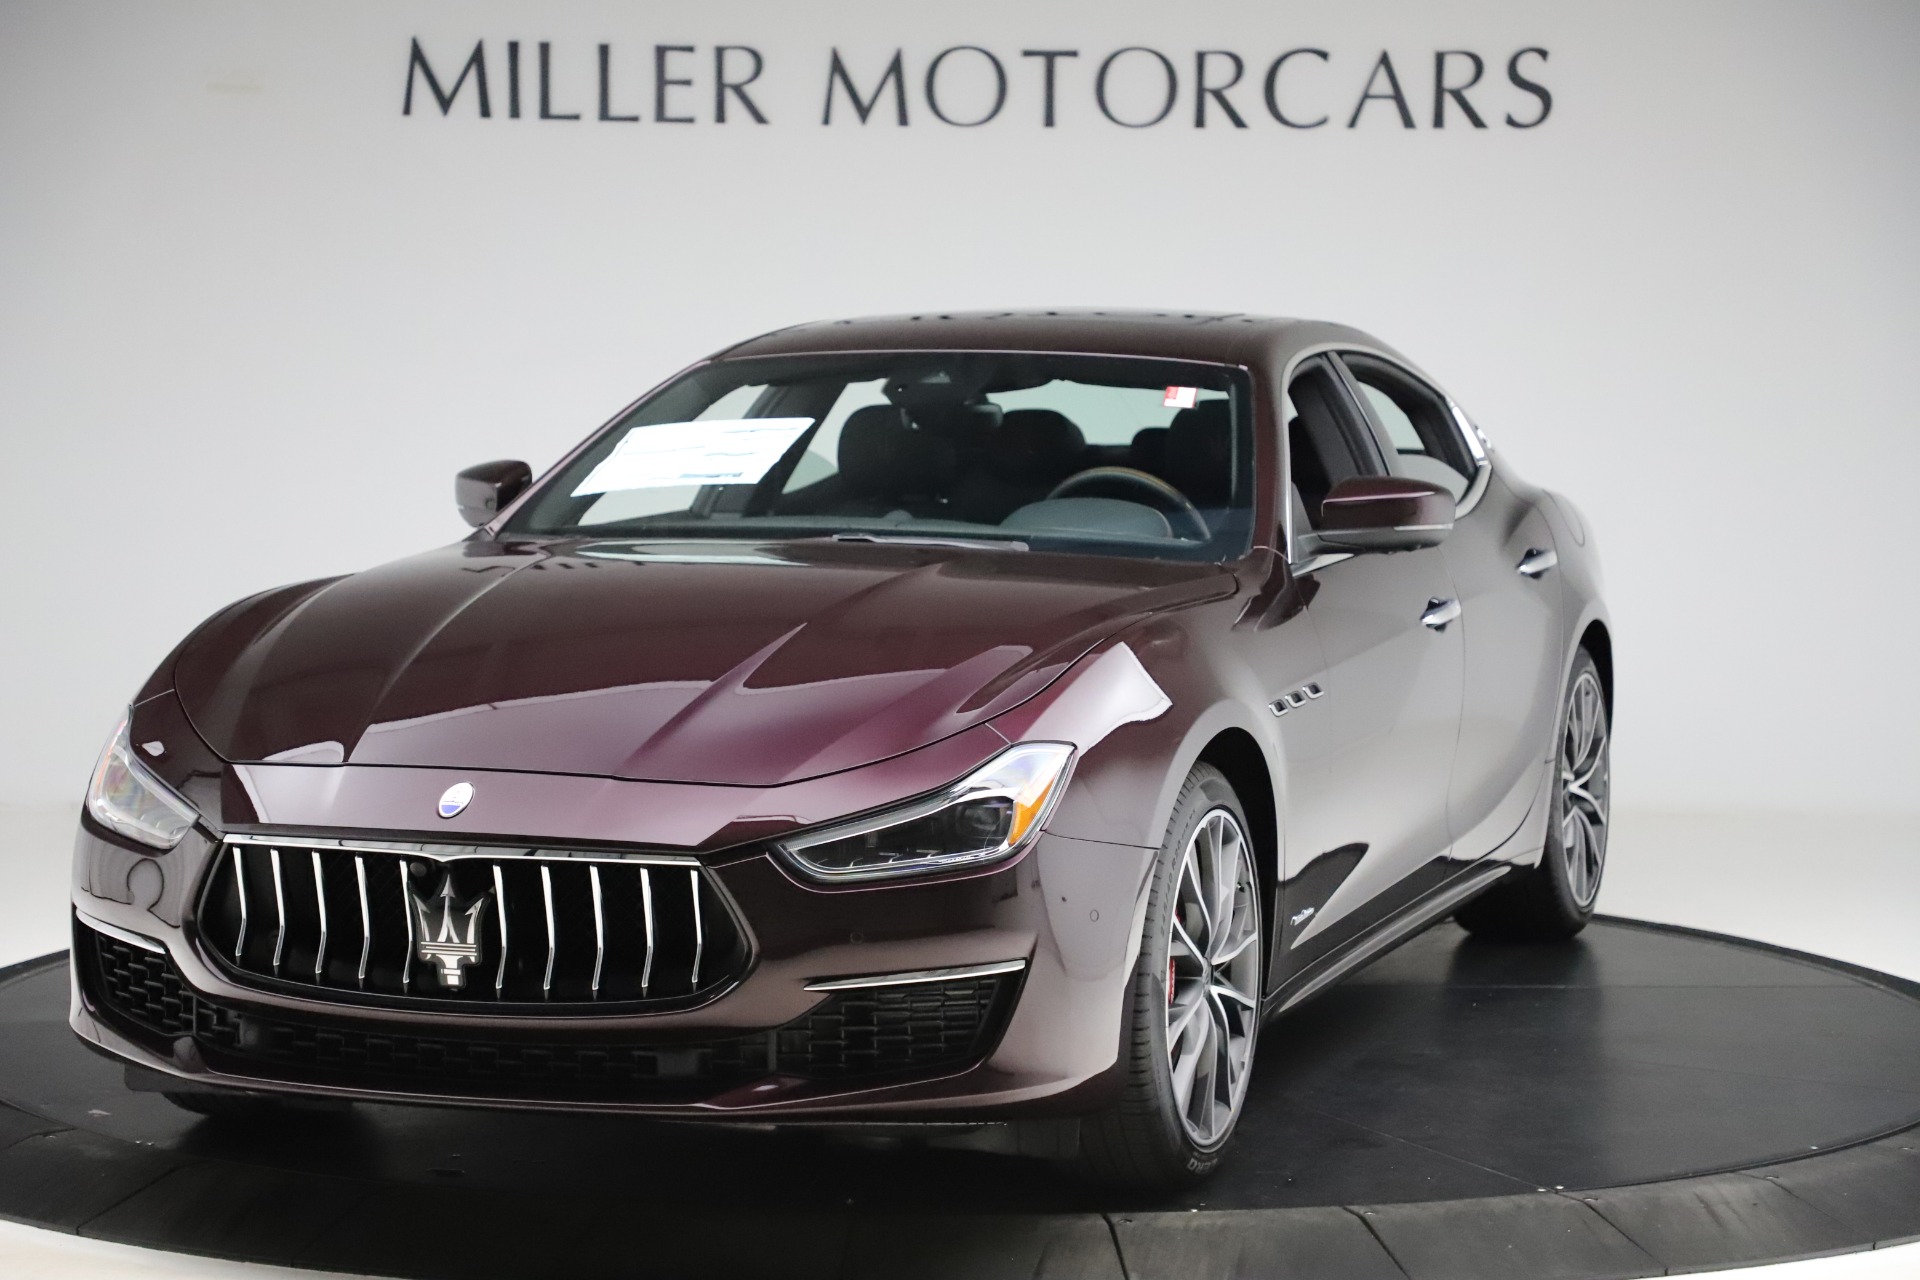 New 2020 Maserati Ghibli S Q4 GranLusso for sale Sold at Rolls-Royce Motor Cars Greenwich in Greenwich CT 06830 1